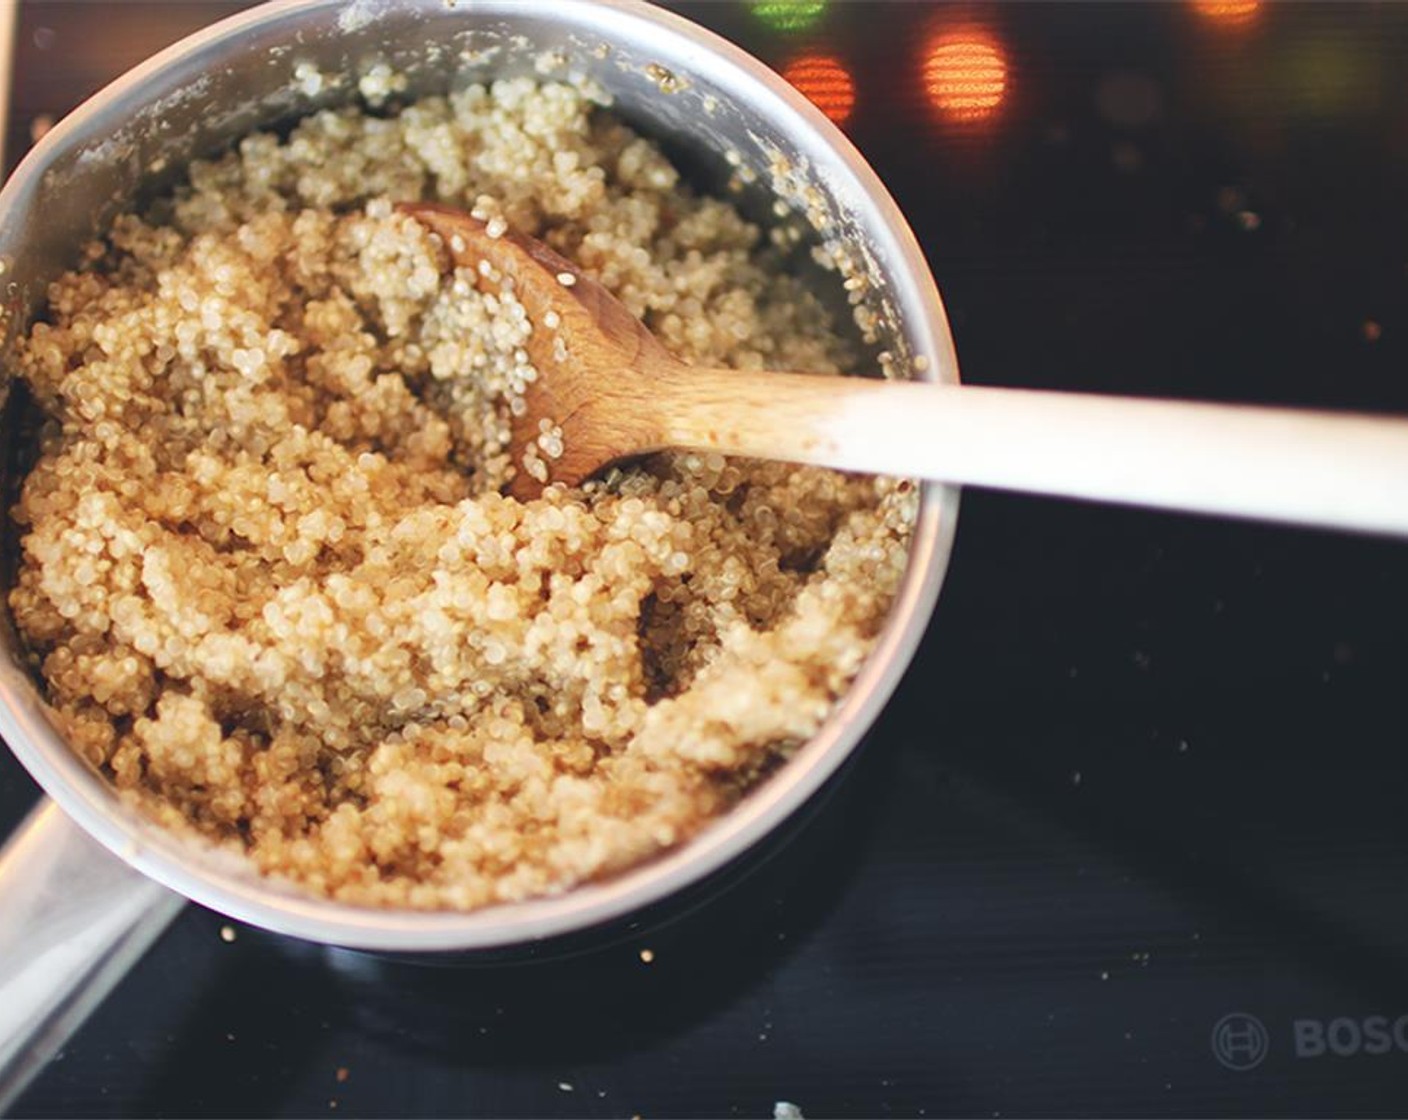 step 1 Firstly, cook the quinoa. For 1 part uncooked Quinoa (1 cup), I use 2 parts Water (2 cups). I put it on full heat then wait until the water starts to boil, then turn it all the way down low. I use a lid like I do with rice. Then you wait for all the water to evaporate.